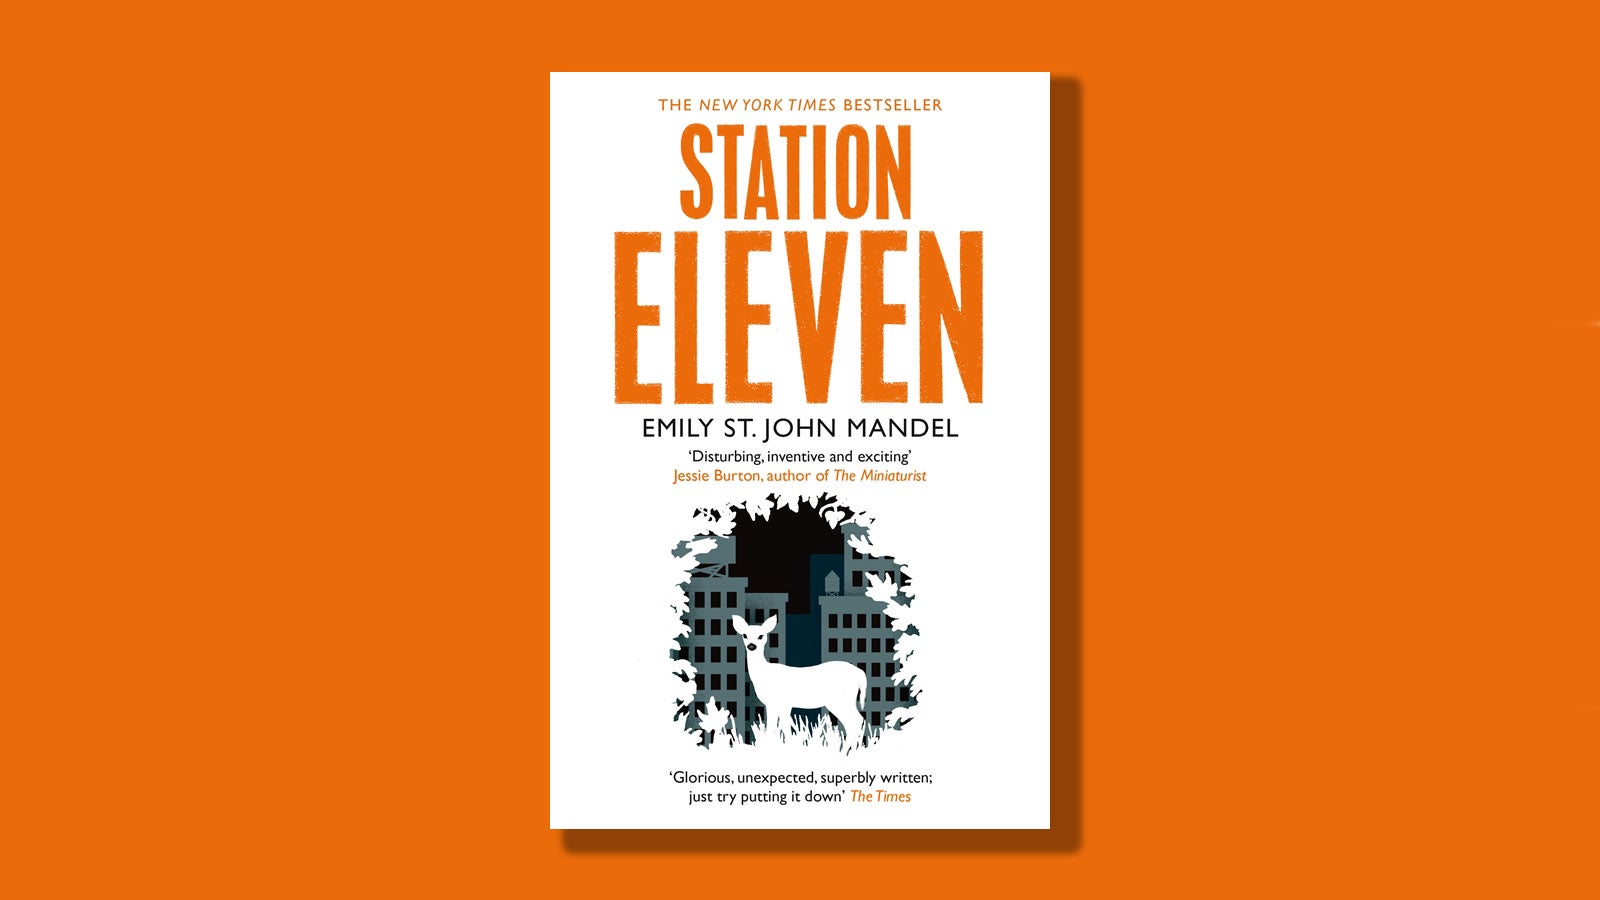 The Jacket cover for the book Station Eleven by Emily St. John Mander - with an illustration of a deer with city buildings in the background